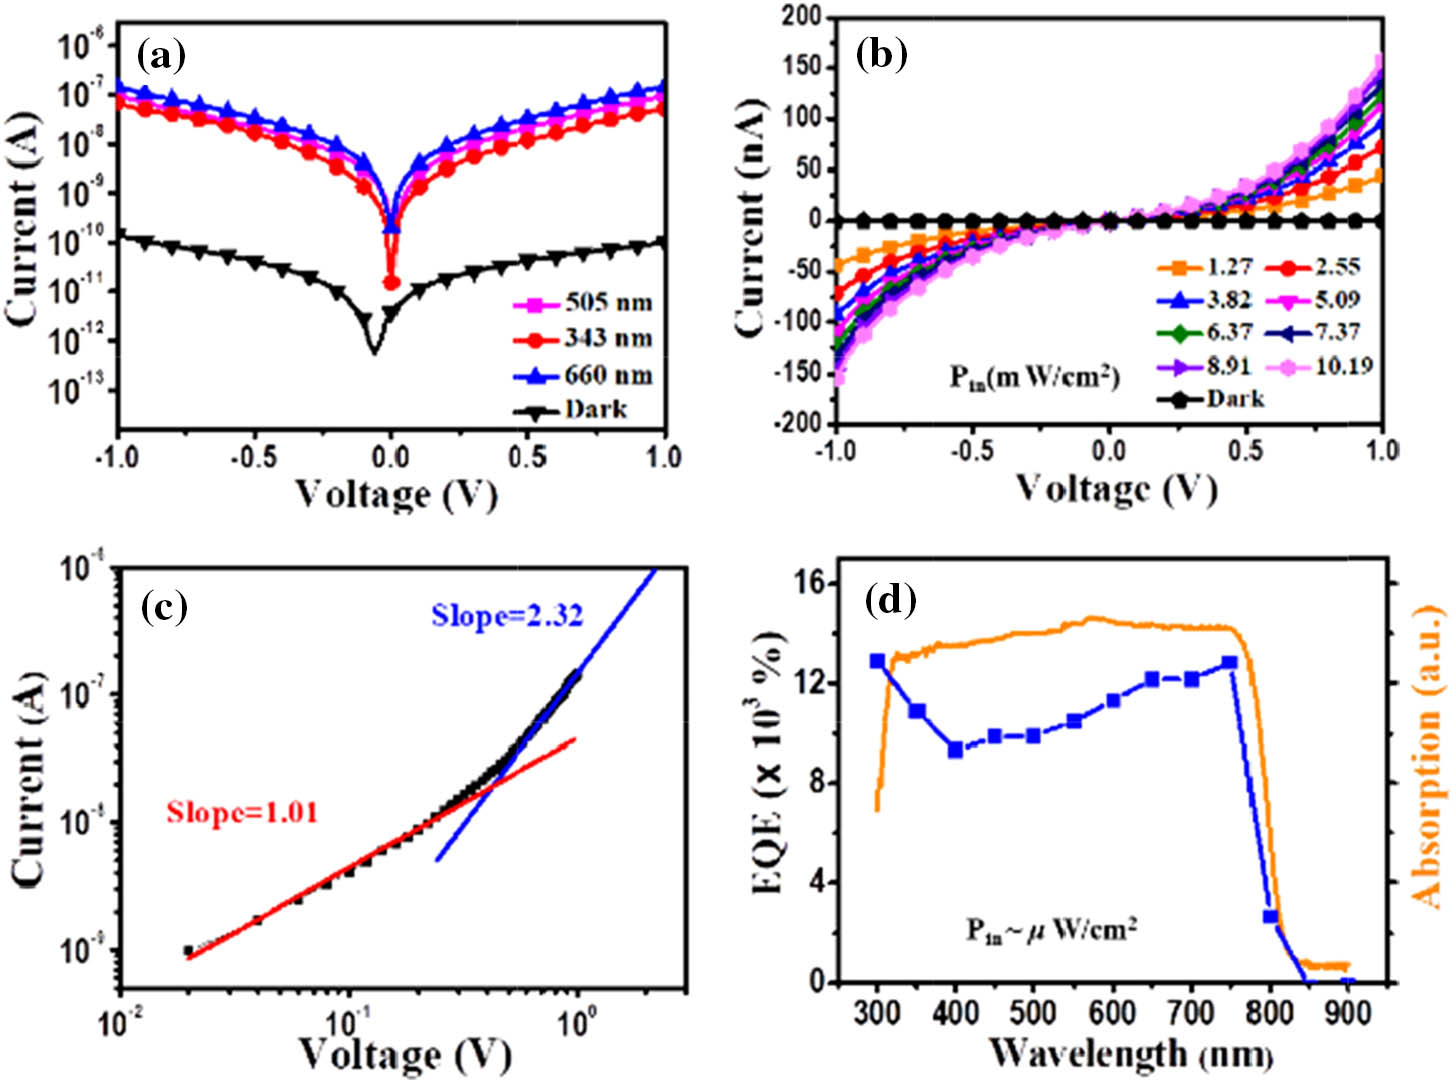 (a) Logarithmic I-V curves under 325-nm, 505-nm, and 660-nm LED illumination at the power density of 10.19 mW/cm2. (b) I-V curves under 660-nm illumination with different power densities. (c) Double logarithmic I-V plot at the power density of 10.19 mW/cm2, 660 nm. (d) Wavelength-dependent EQE response and the absorption spectrum of the MAPbI3 nanowire photodetector.